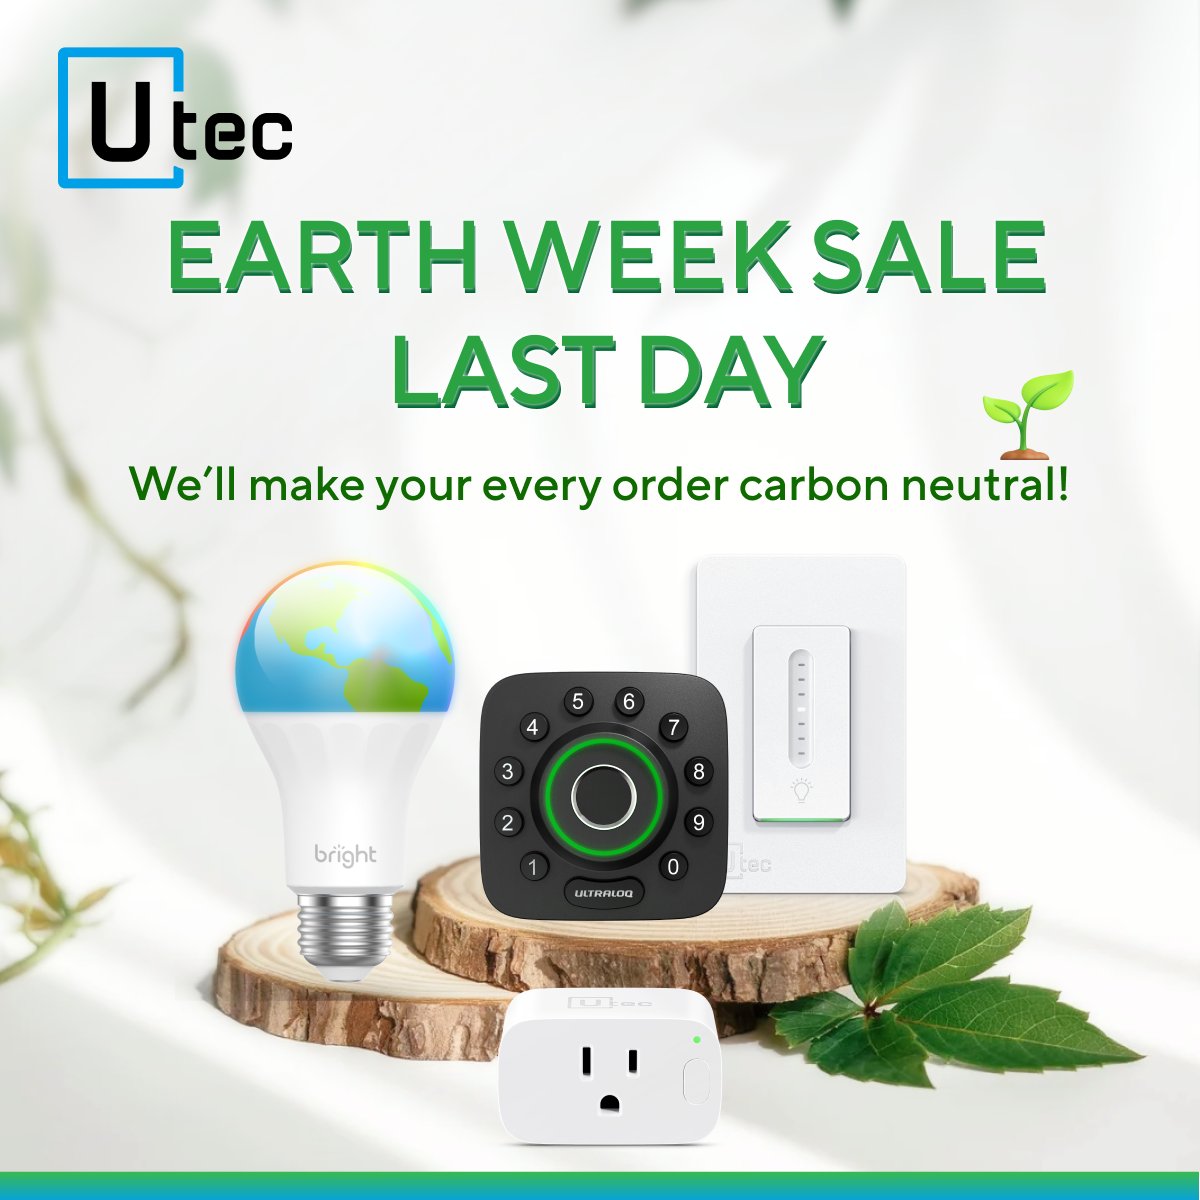 🌍 Last chance to make a difference with
your purchase! Our Earth Week Sale ends tonight!
Don't miss out on up to 25% off & your chance to
support global sustainability with every order🌱💚

🔜 u-tec.com/pages/u-tec-ea… 

#EarthWeek #smarthome #smartlock #ecofriendly #carbonoffset